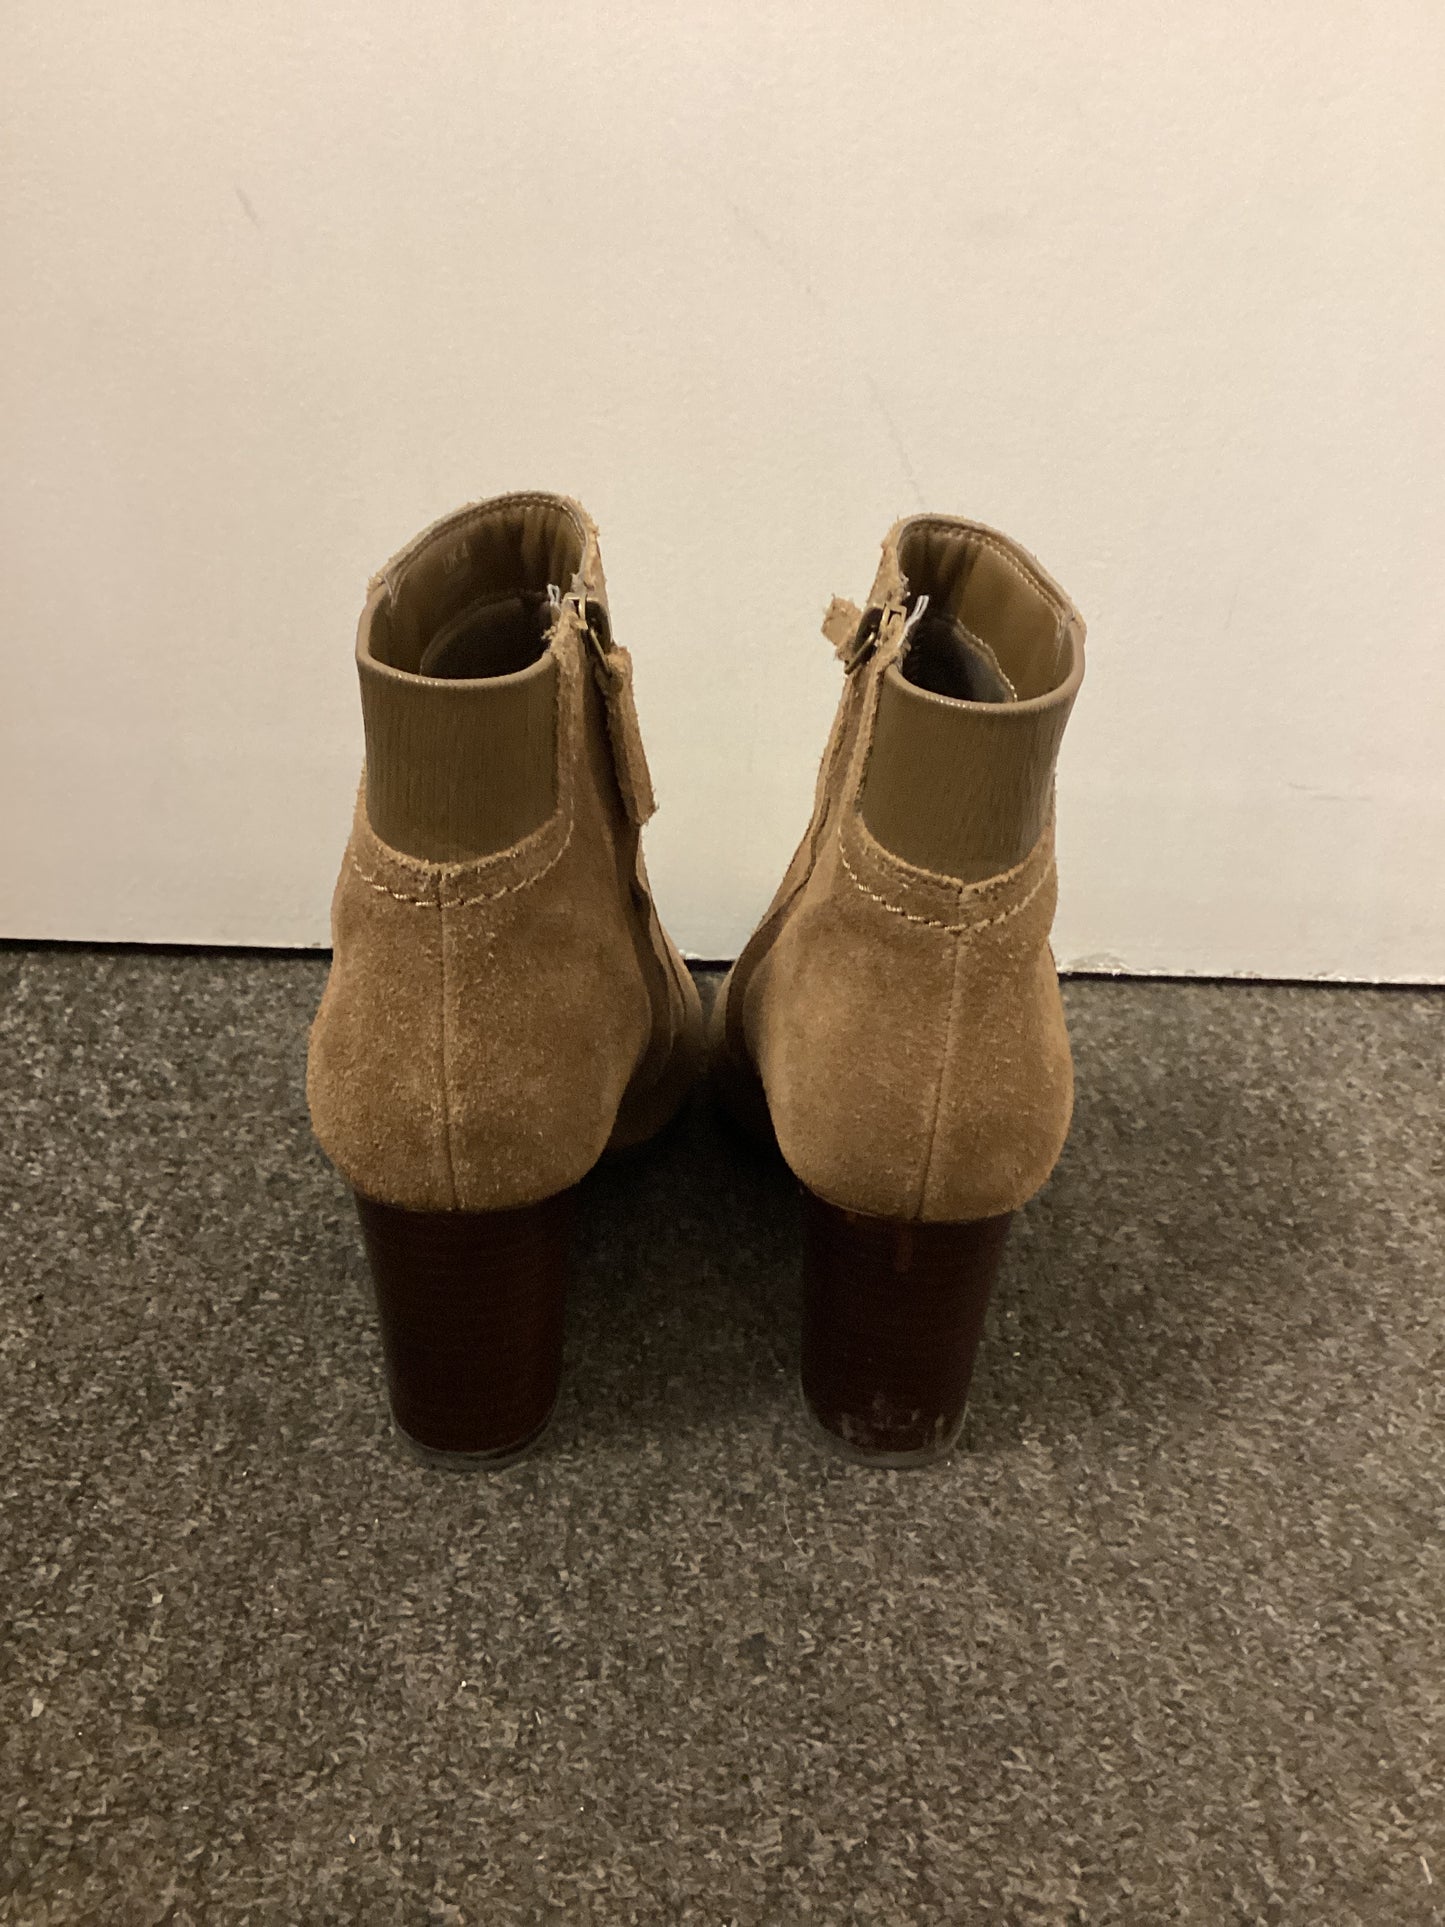 M&S Brown Suede Leather Heeled Boots Size UK 4